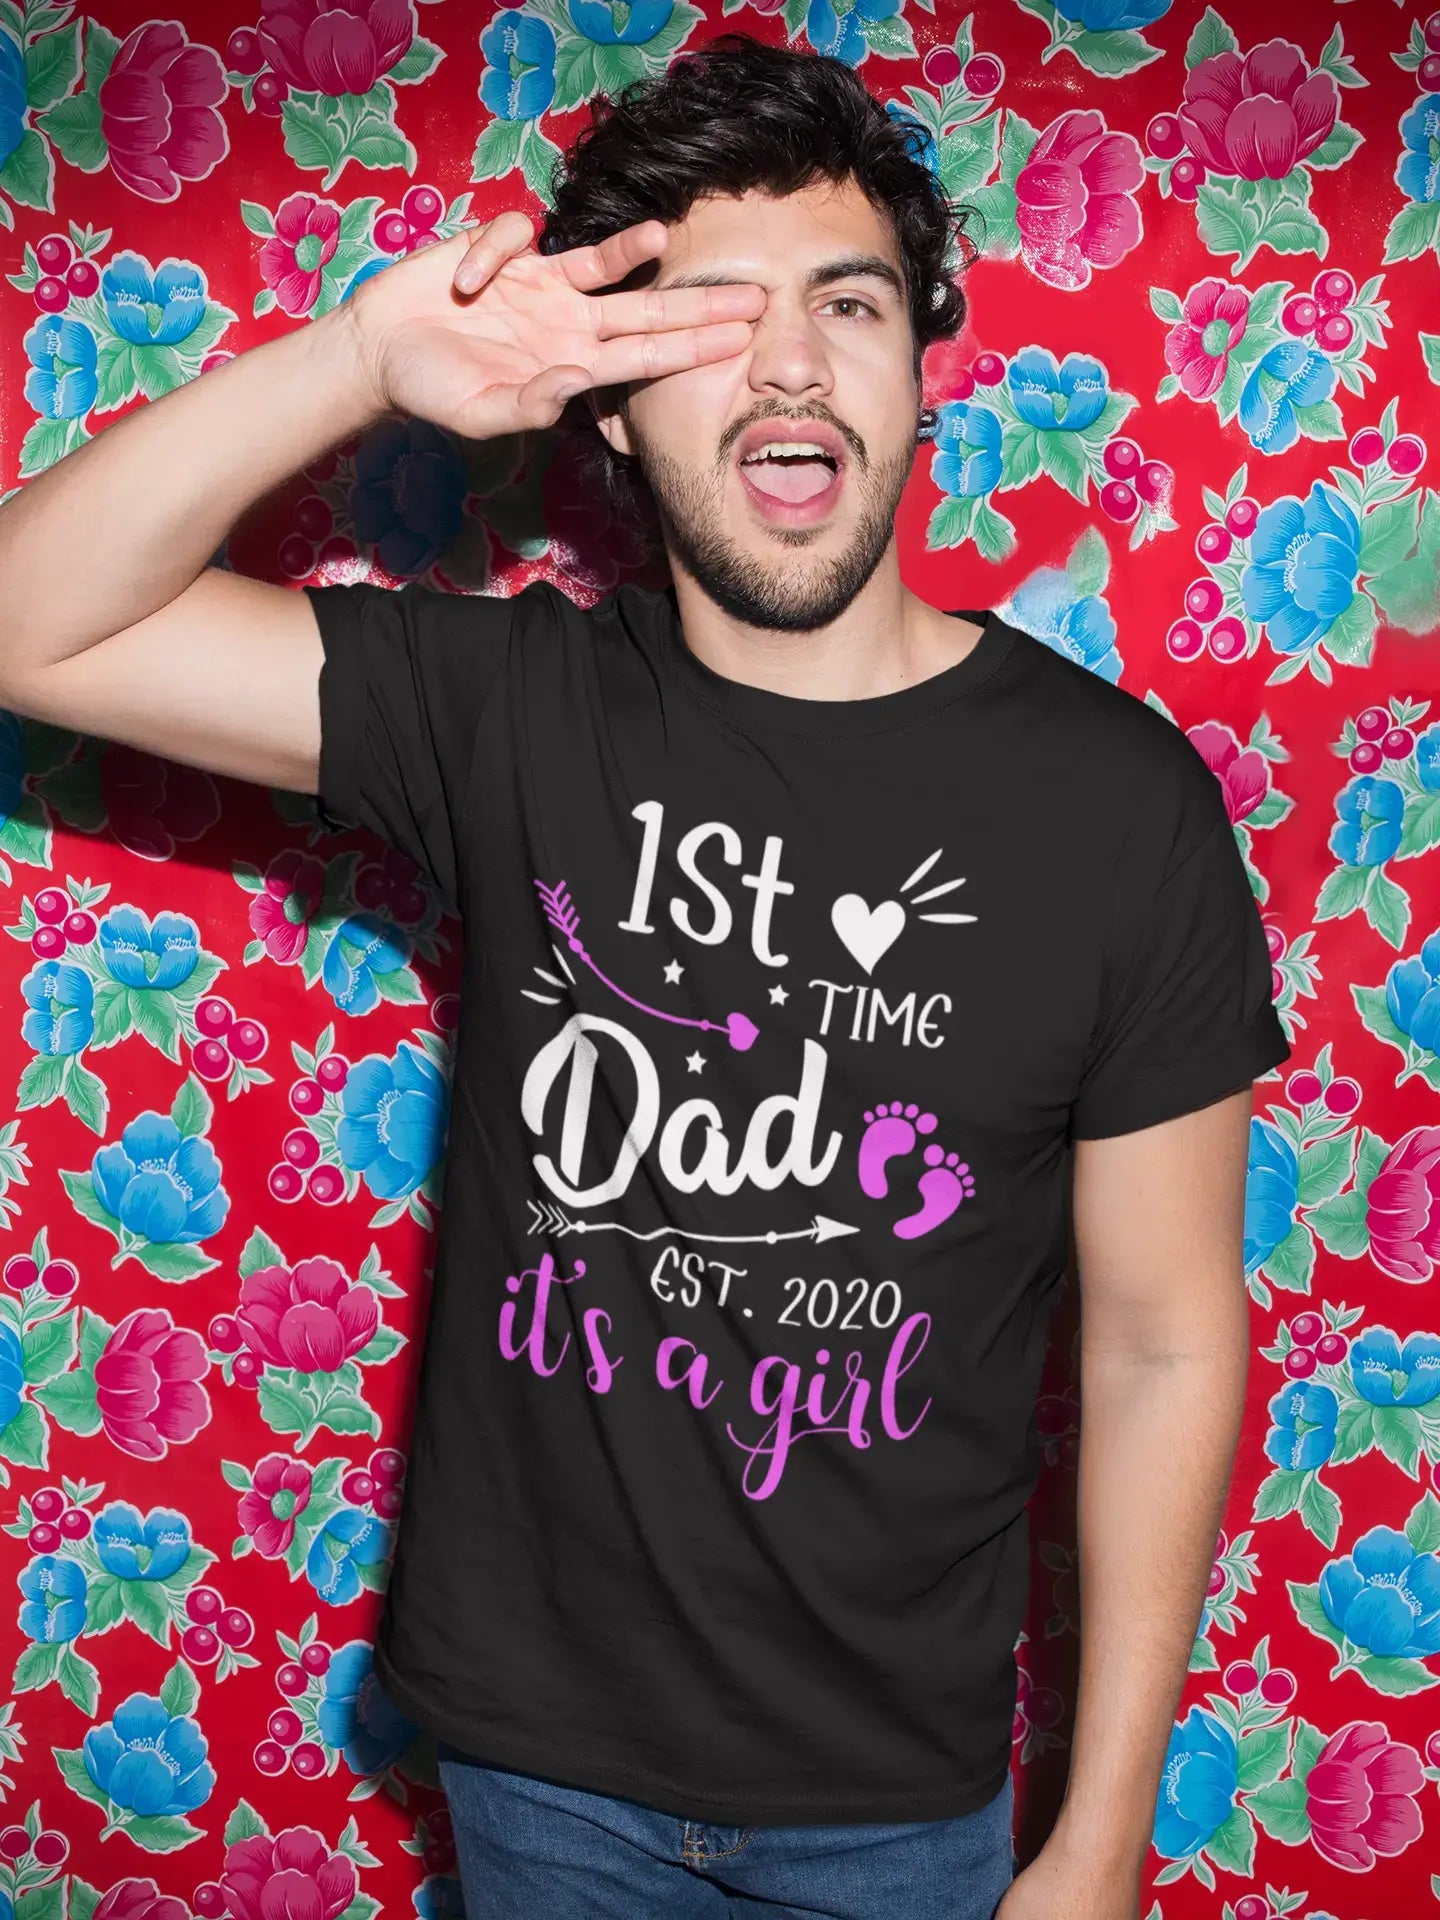 ULTRABASIC Men's Graphic T-Shirt 1st Time Dad Est 2020 It's a Girl - Parenting Time - Father's Day